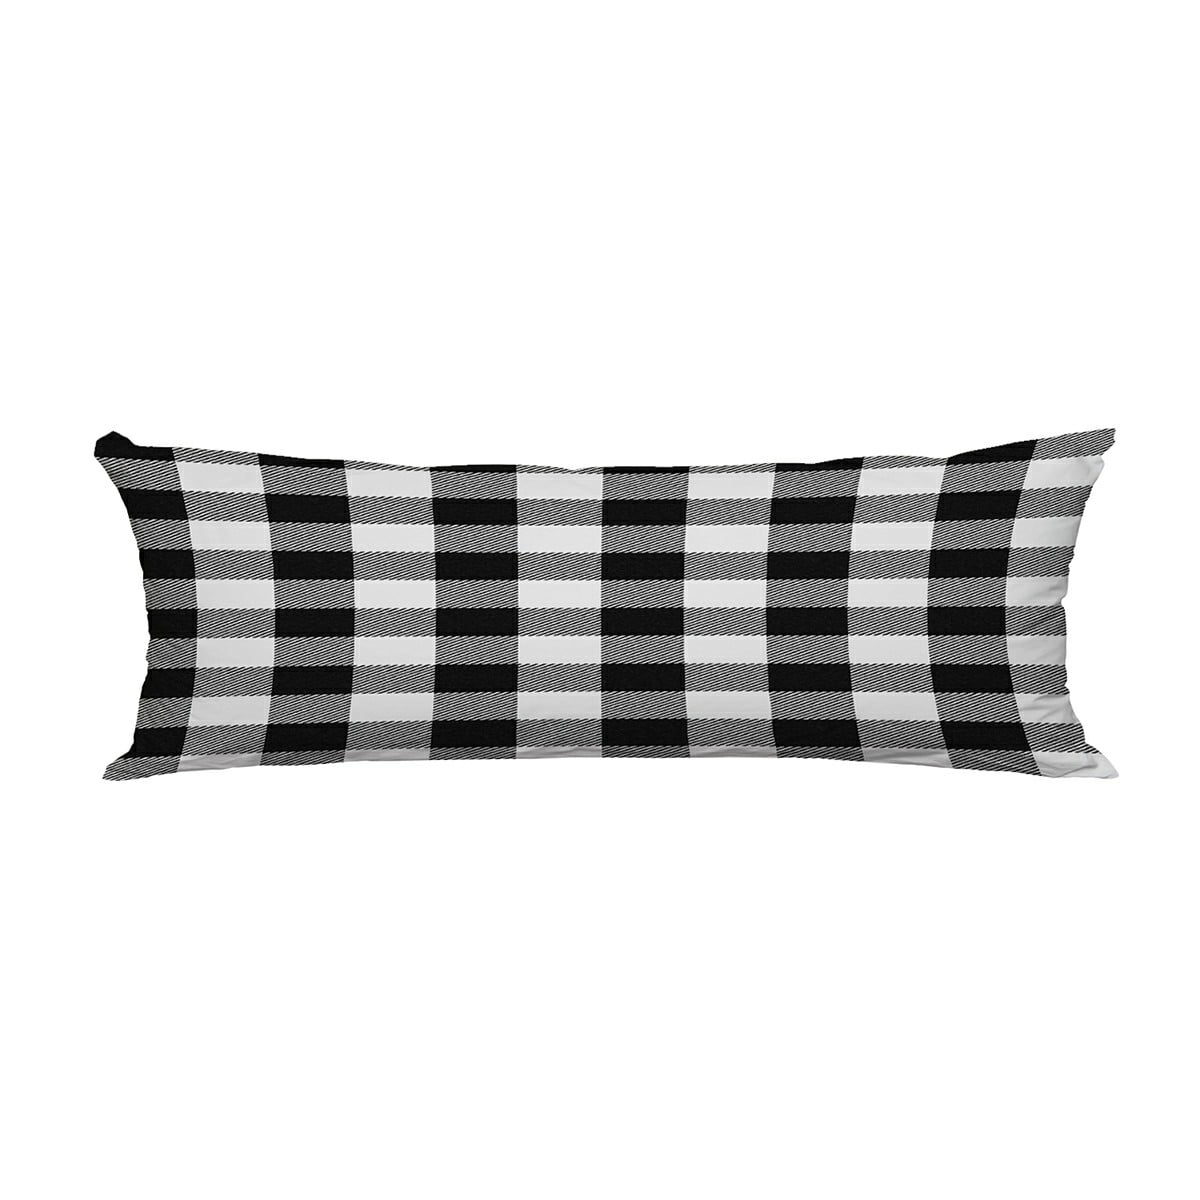 Black and White Check Rustic Woodland Flannel Pillow Not Included Sweet Jojo Designs Buffalo Plaid Body Pillow Case Cover 